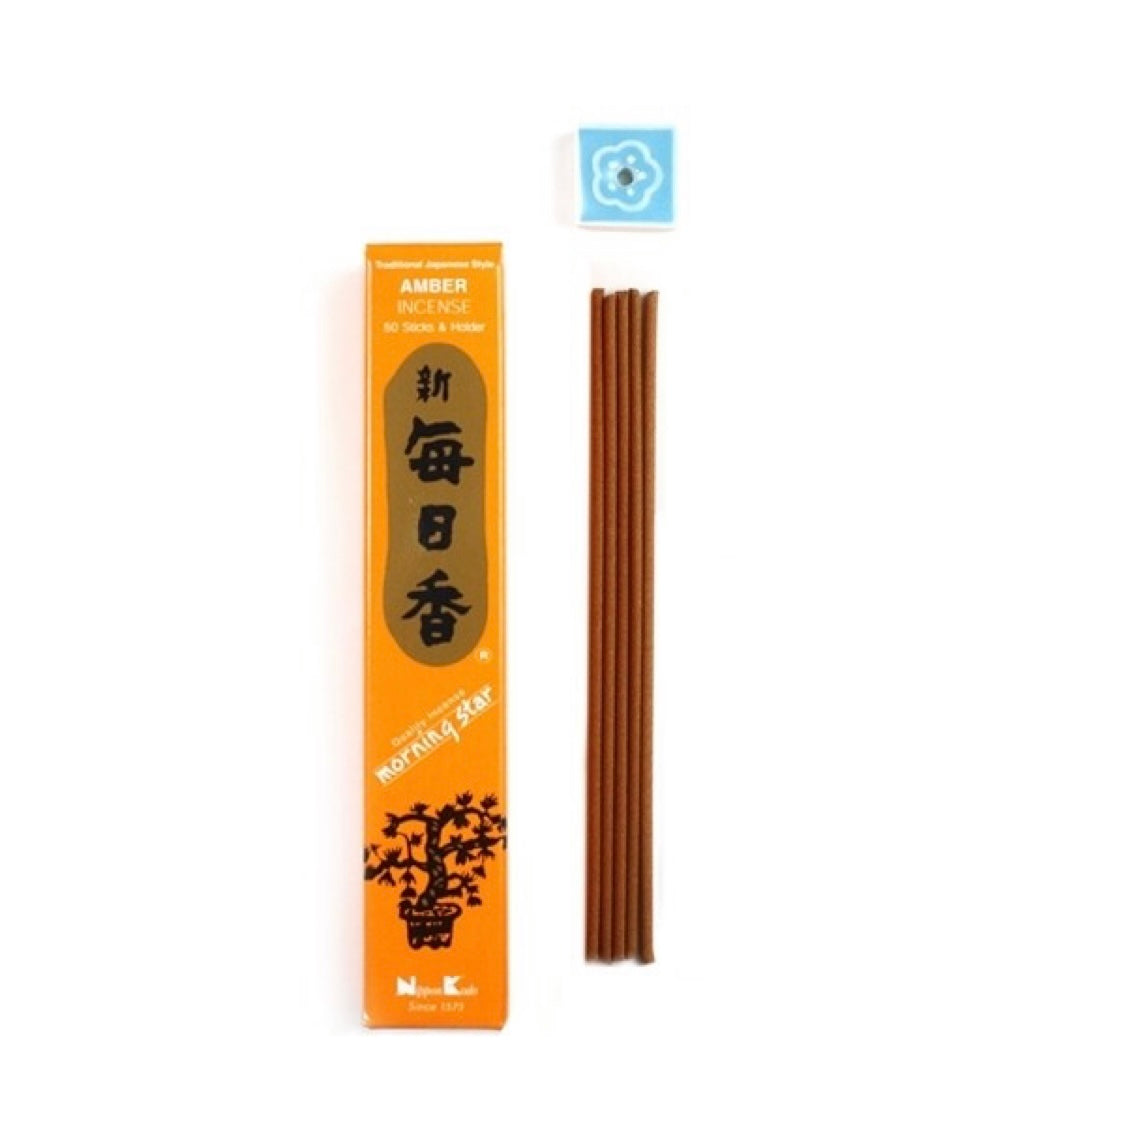 Morning Star Amber incenso giapponese in bastoncini - 50 stick